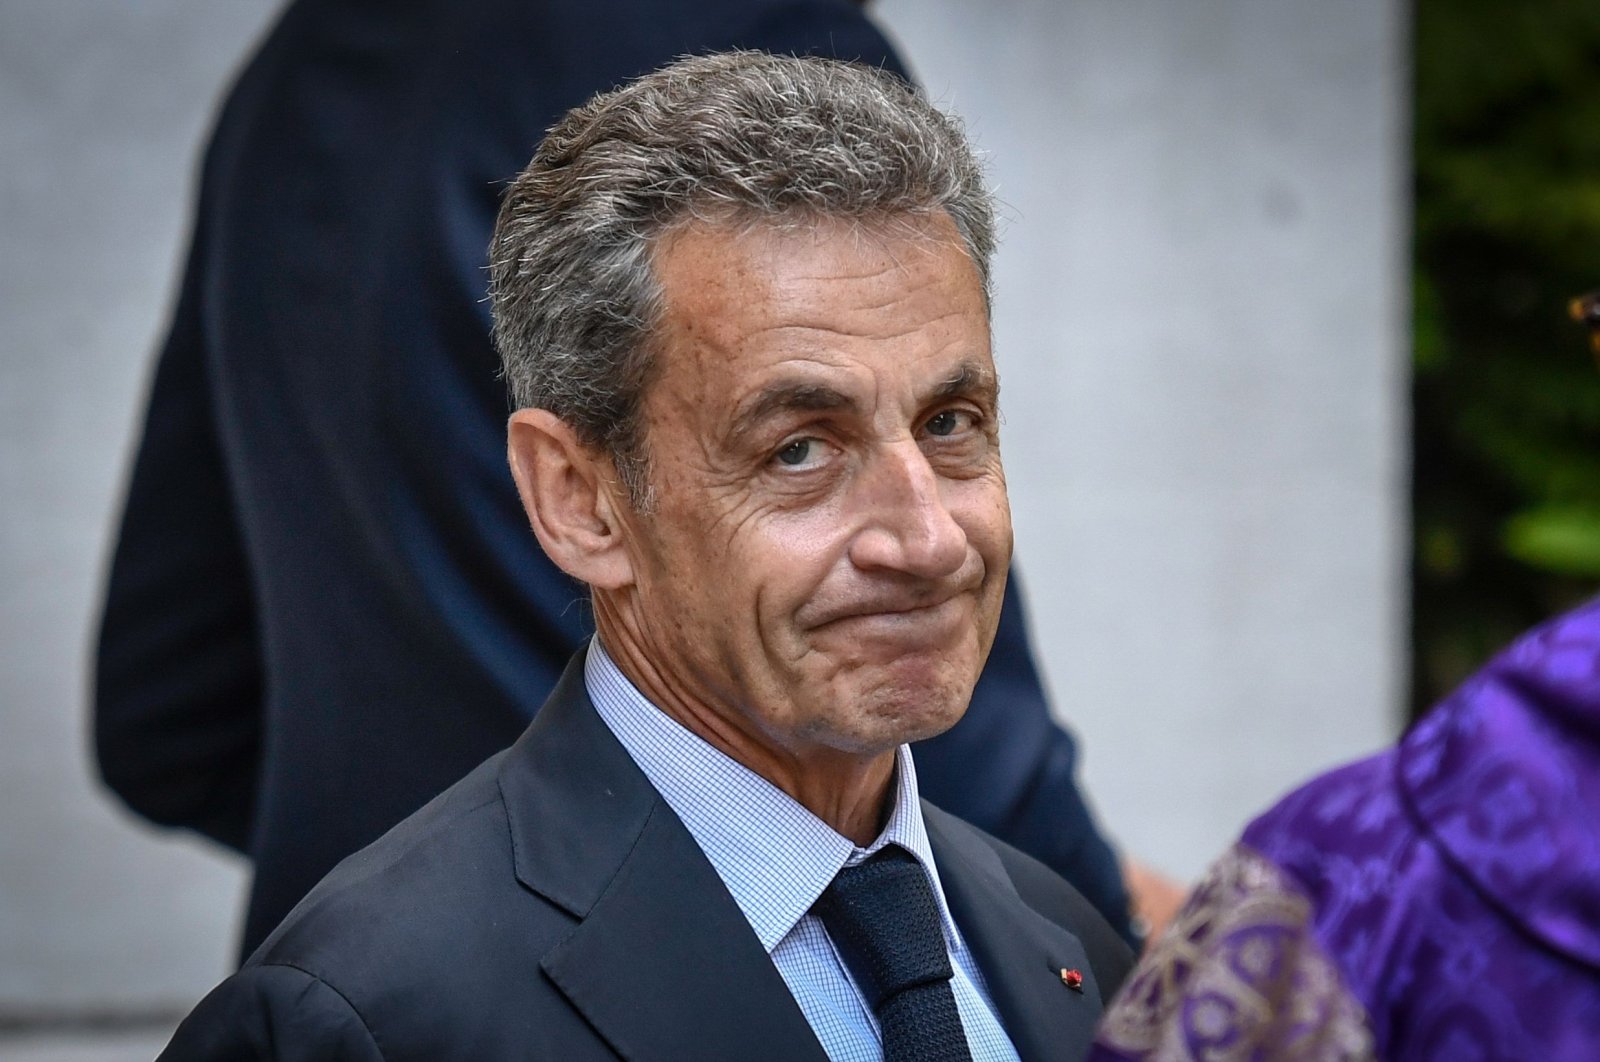 Former French President Nicolas Sarkozy leaves the mass for the funeral of late French Justice Minister Pascal Clement at Saint Peter's Church in Neuilly-sur-Seine, France, June 25, 2020. (AFP Photo)